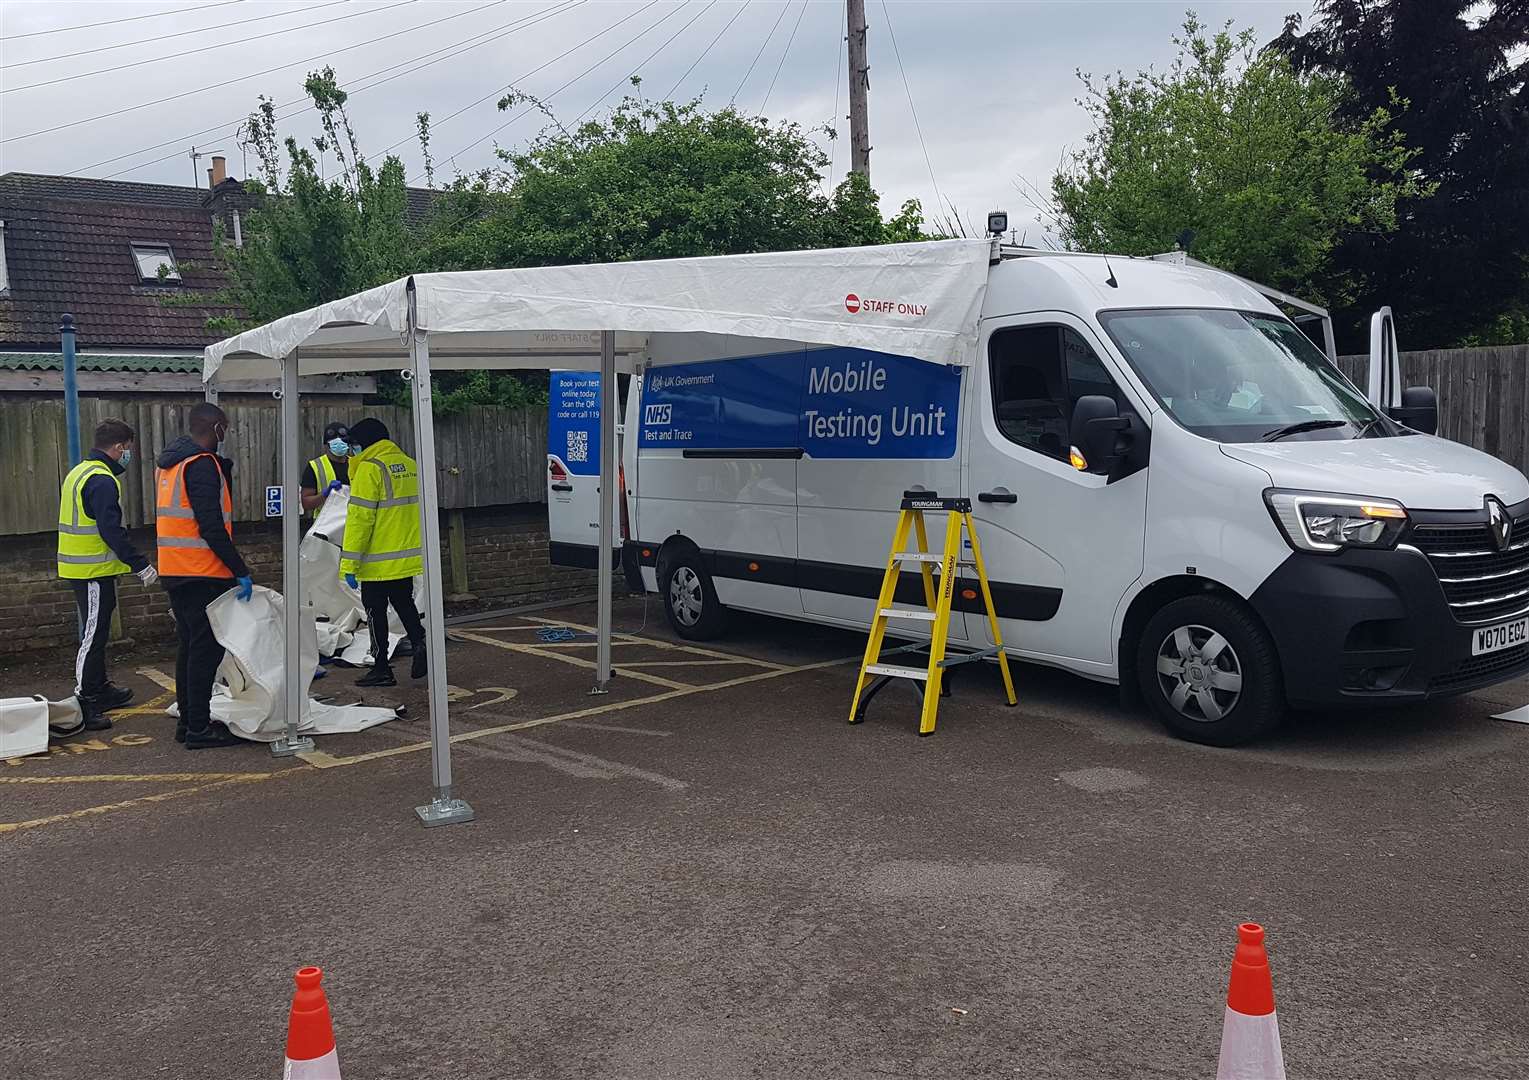 The mobile testing unit in the car park at Quaker Meeting House in Maidstone being set up